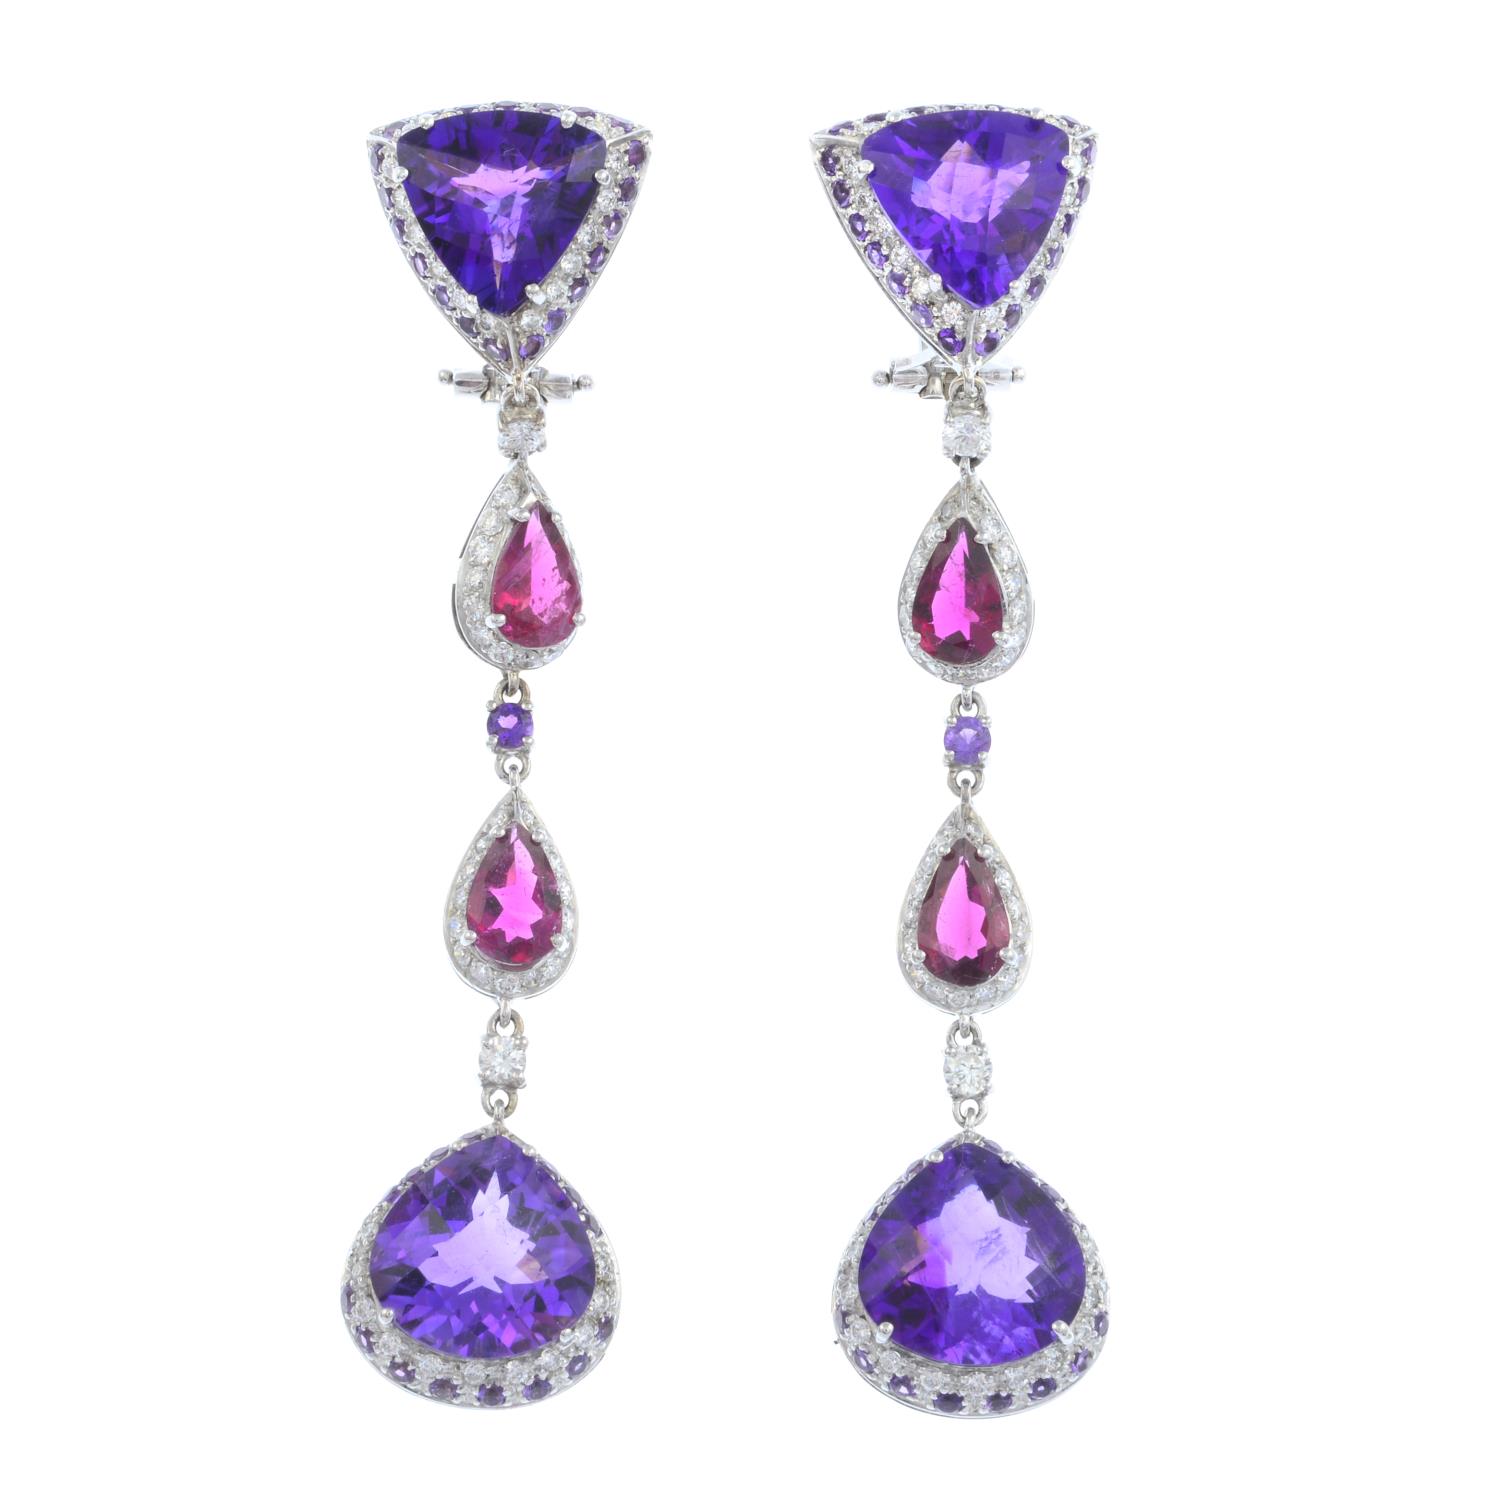 A pair of 18ct gold amethyst, tourmaline and diamond earrings.